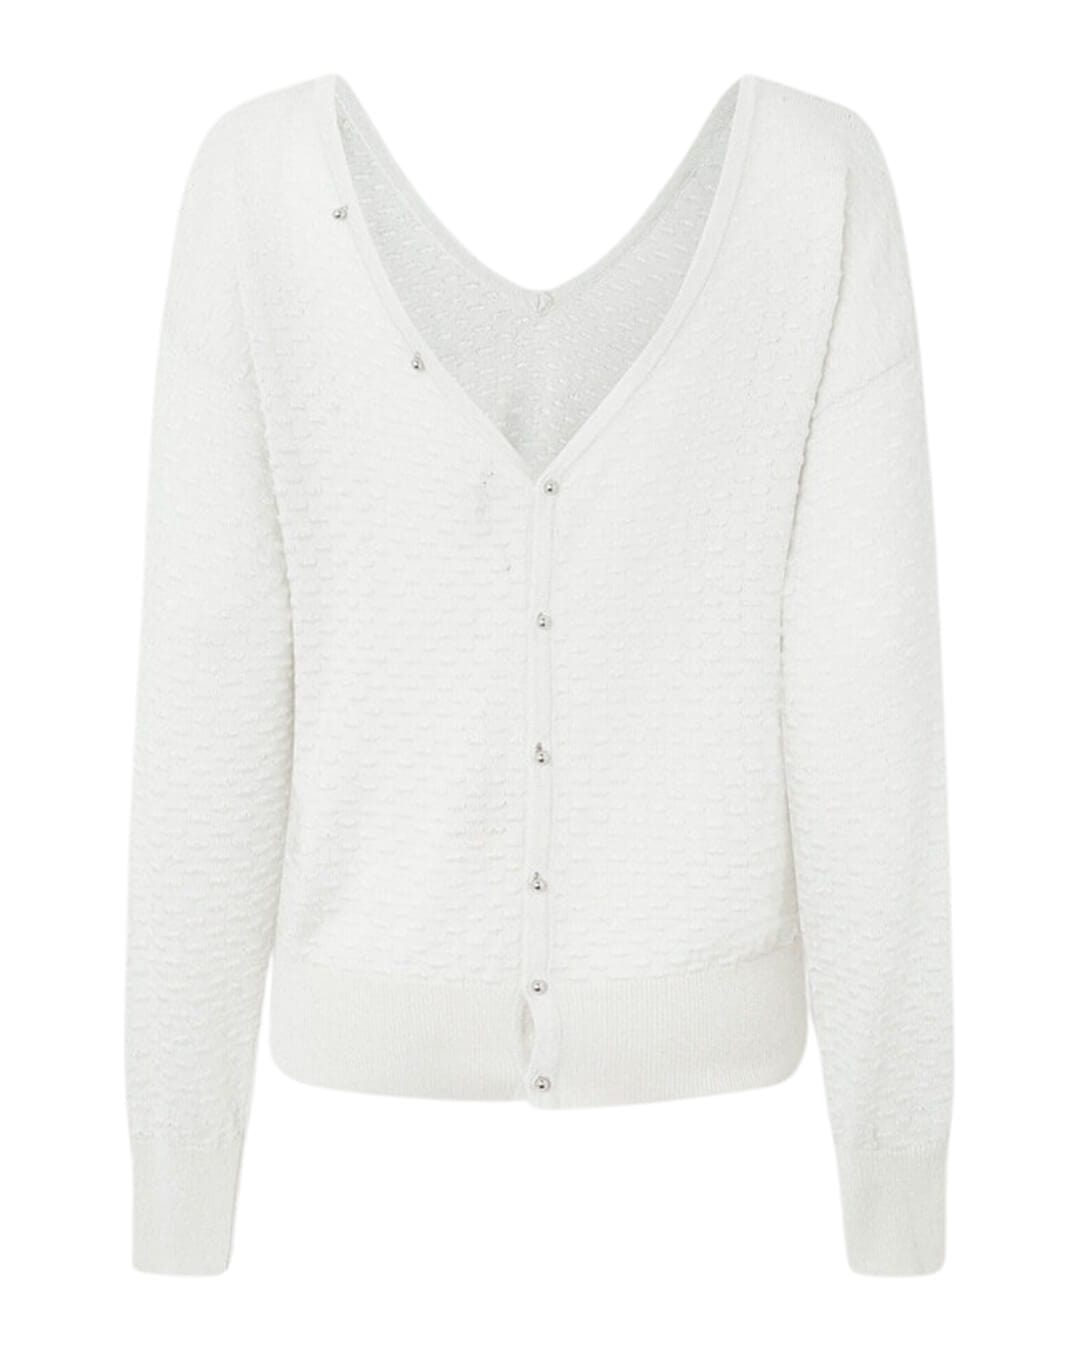 Pepe Jeans Jumpers Pepe Jeans Dani White Jumper